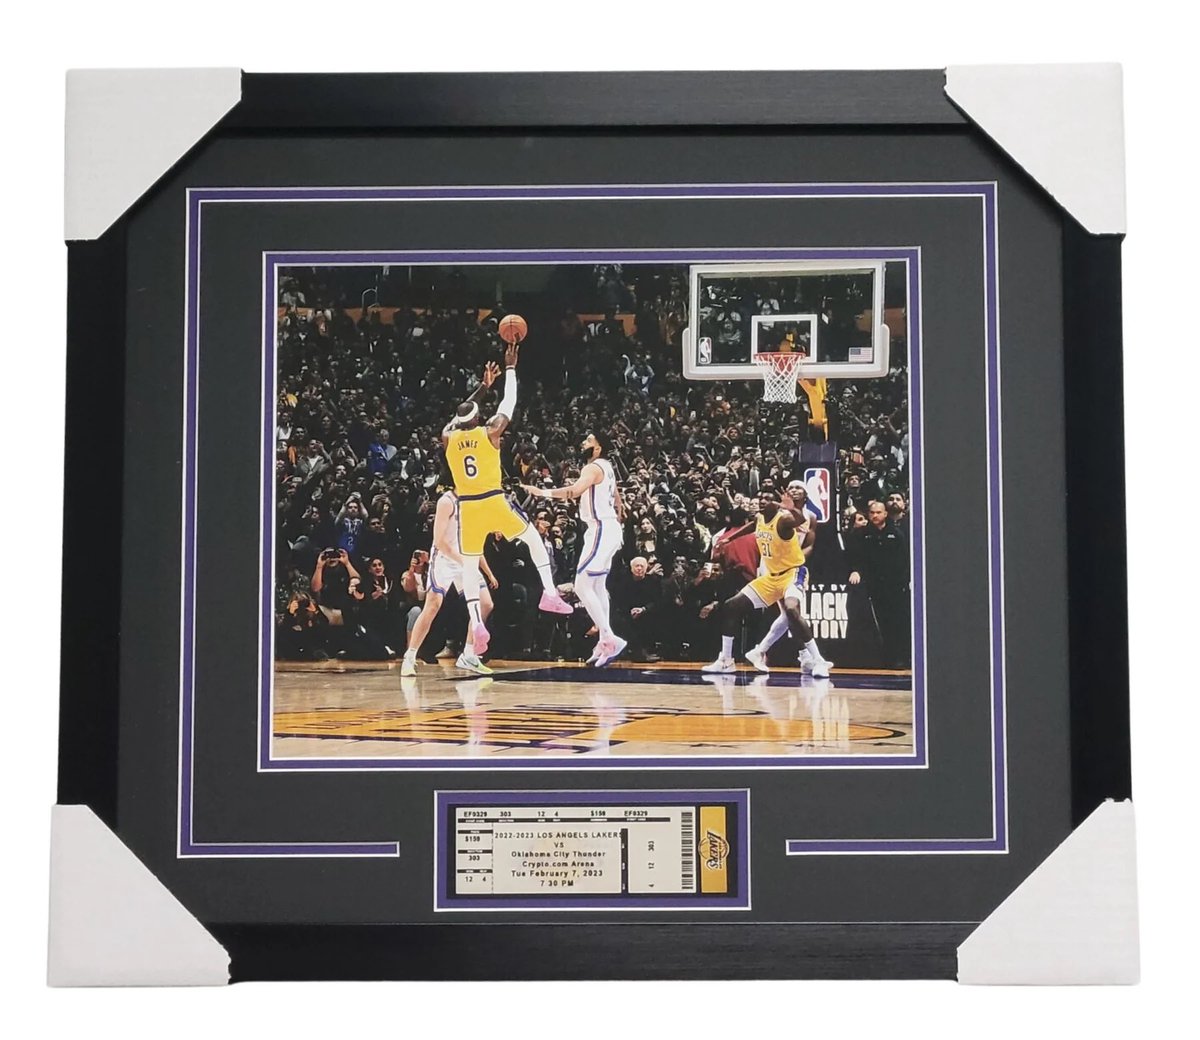 We are giving away a framed image and ticket of LeBron’s record breaking shot To enter: • RETWEET this tweet • MUST FOLLOW 👉 @BettorEdge Winner announced next Friday at 8 PM ET